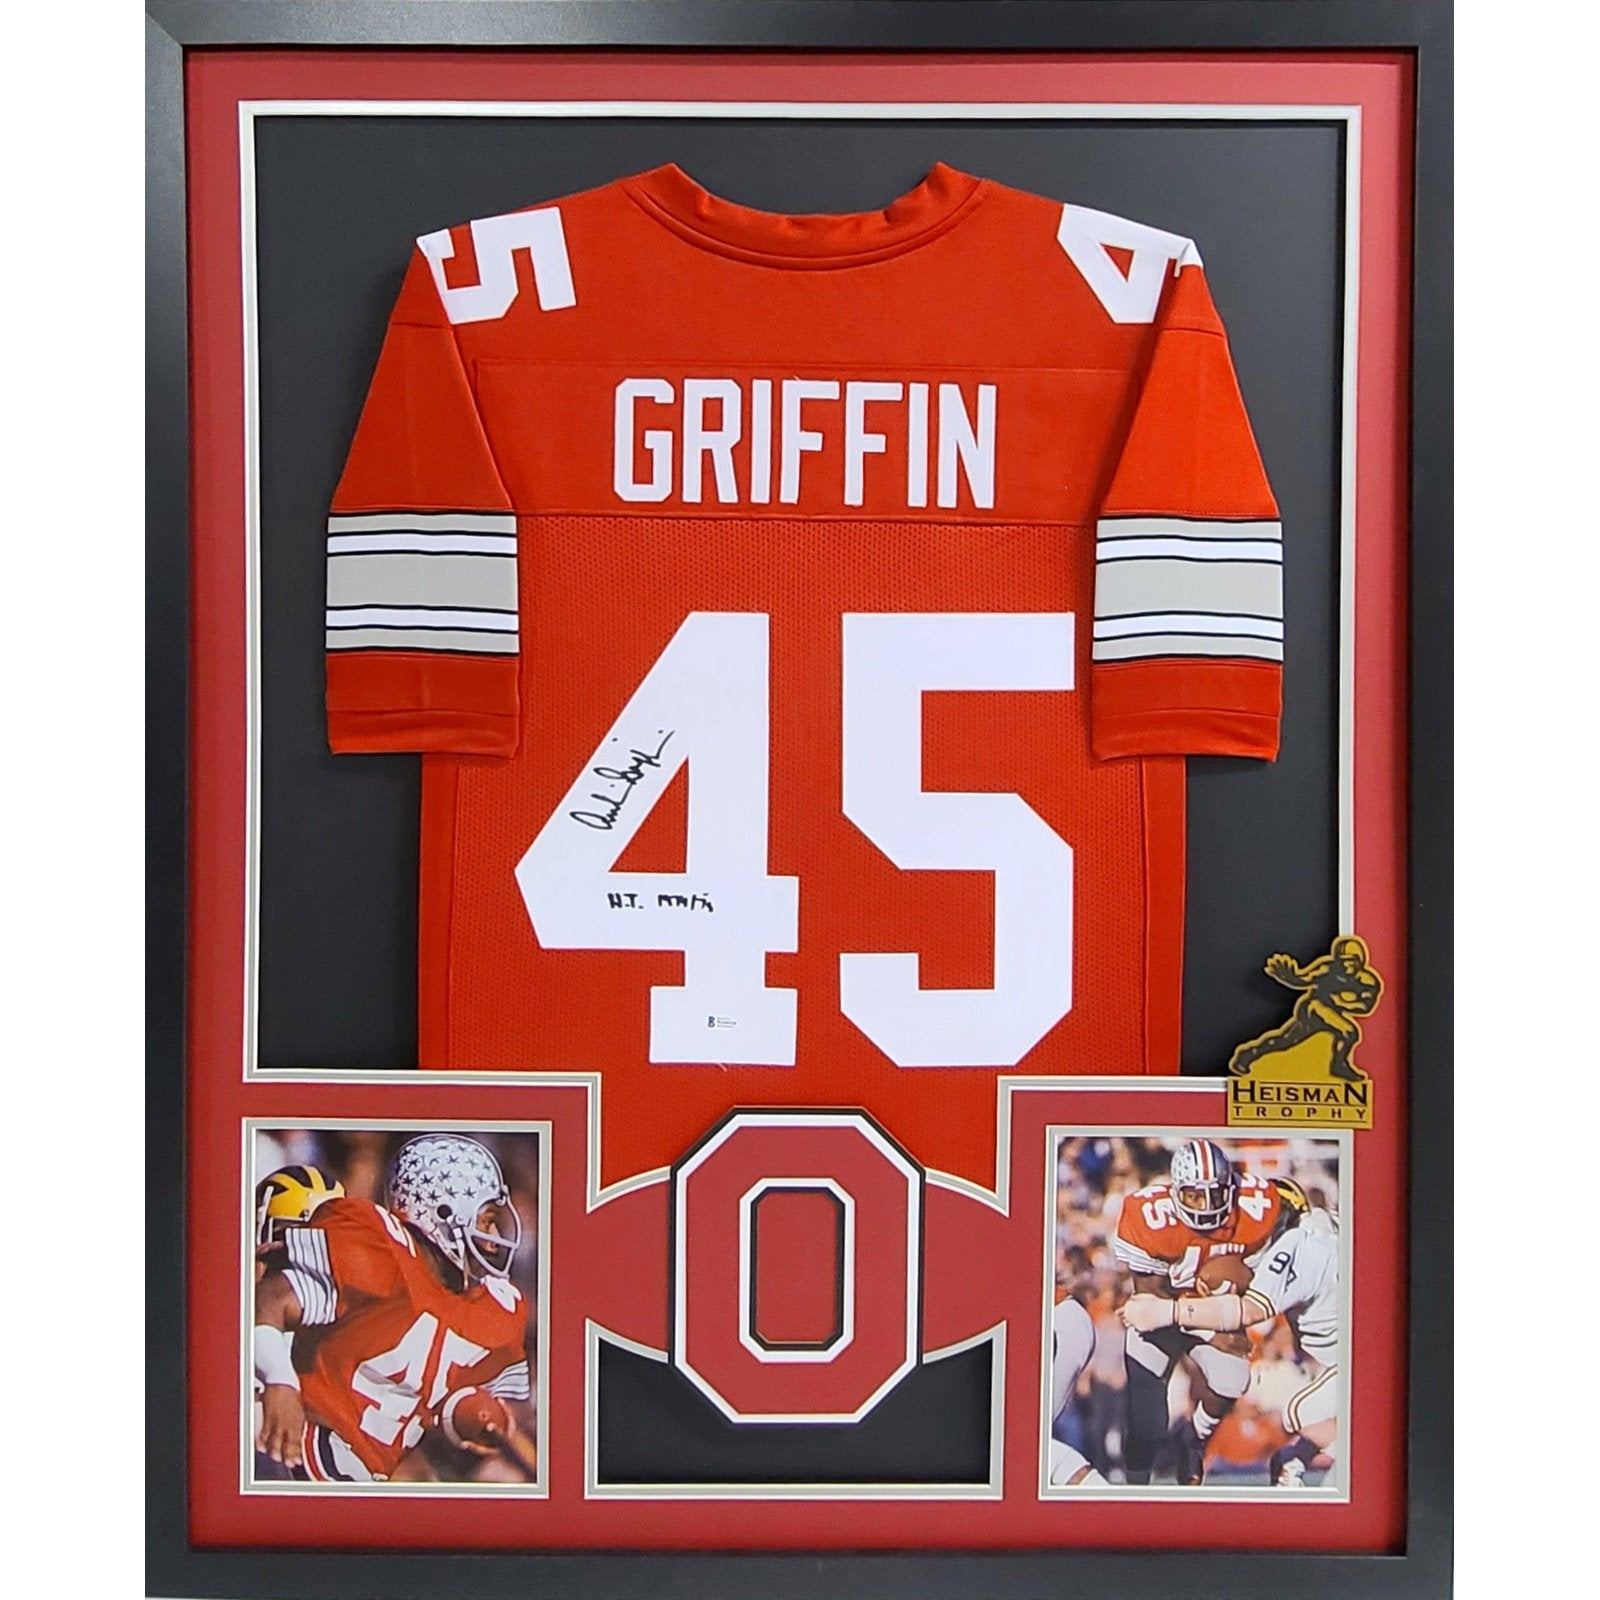 Archie Griffin Framed Signed Jersey Beckett Autographed Ohio State Heisman RB2